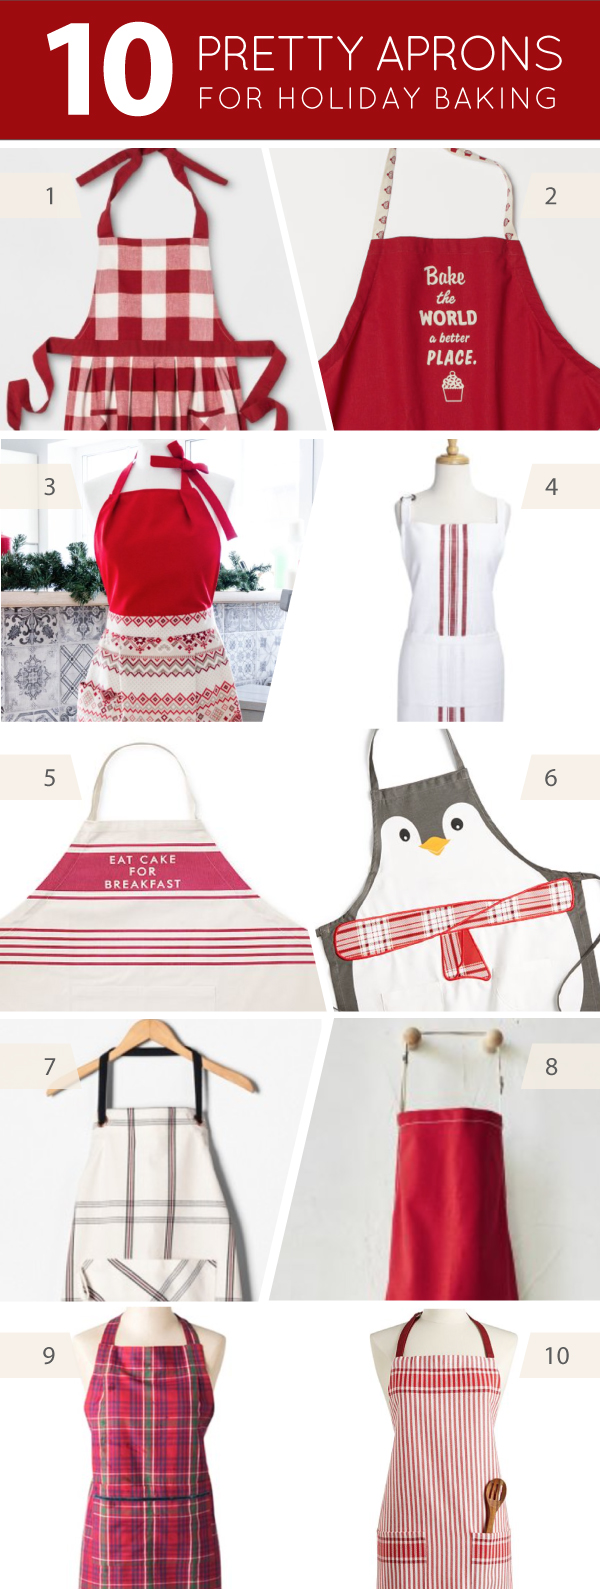 10 Christmas Aprons for holiday baking | on TheCakeBlog.com